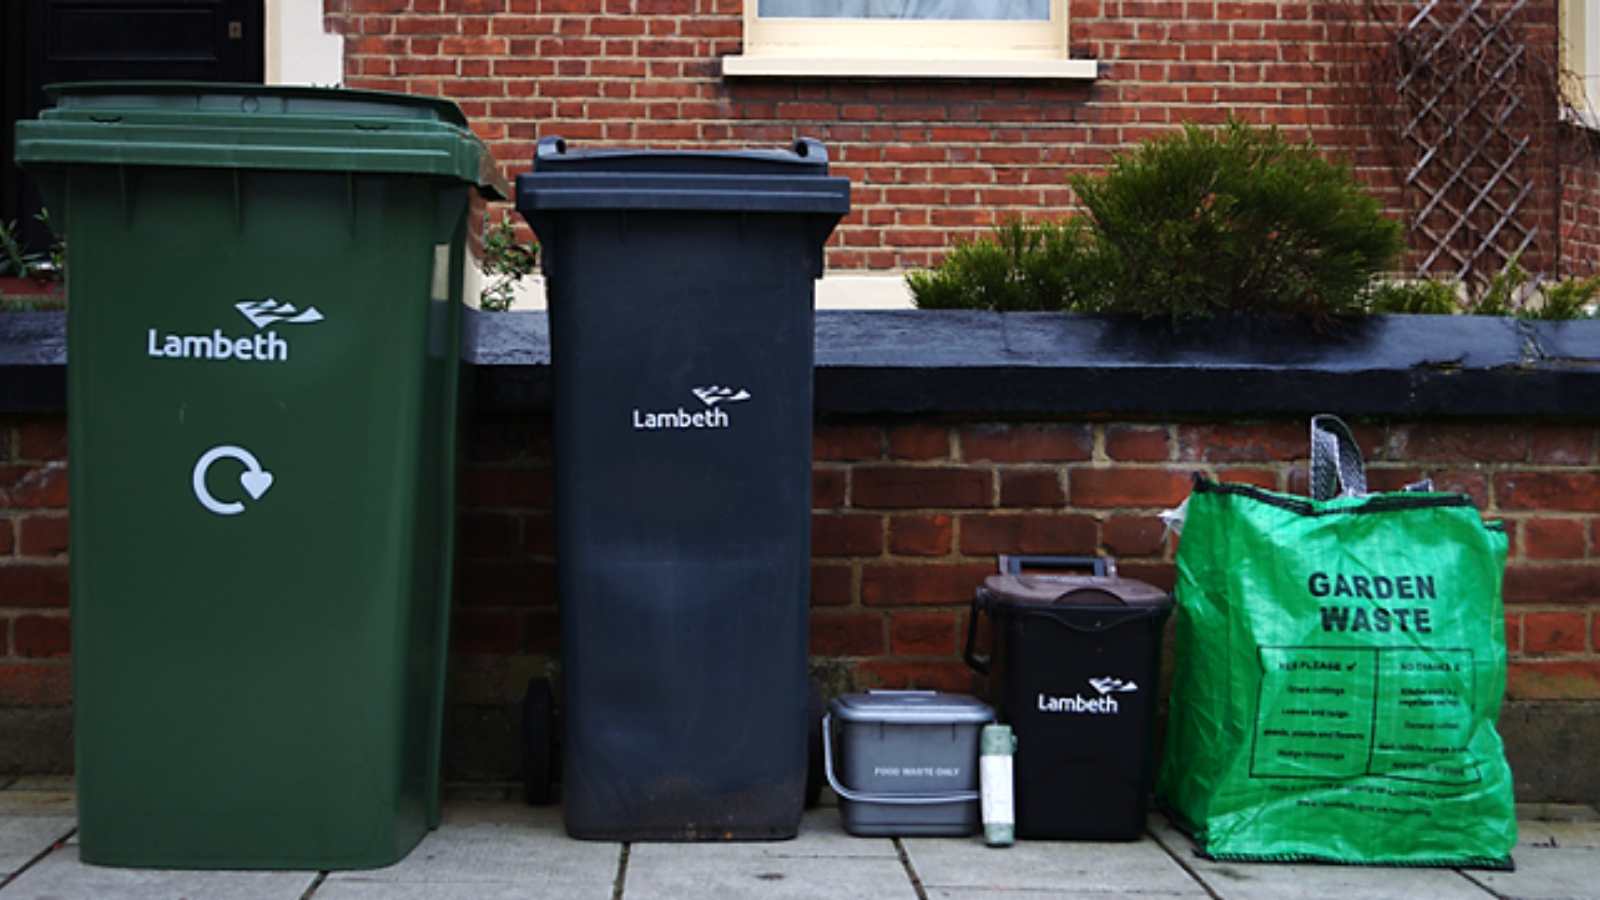 Lambeth: First fortnightly waste routes to start